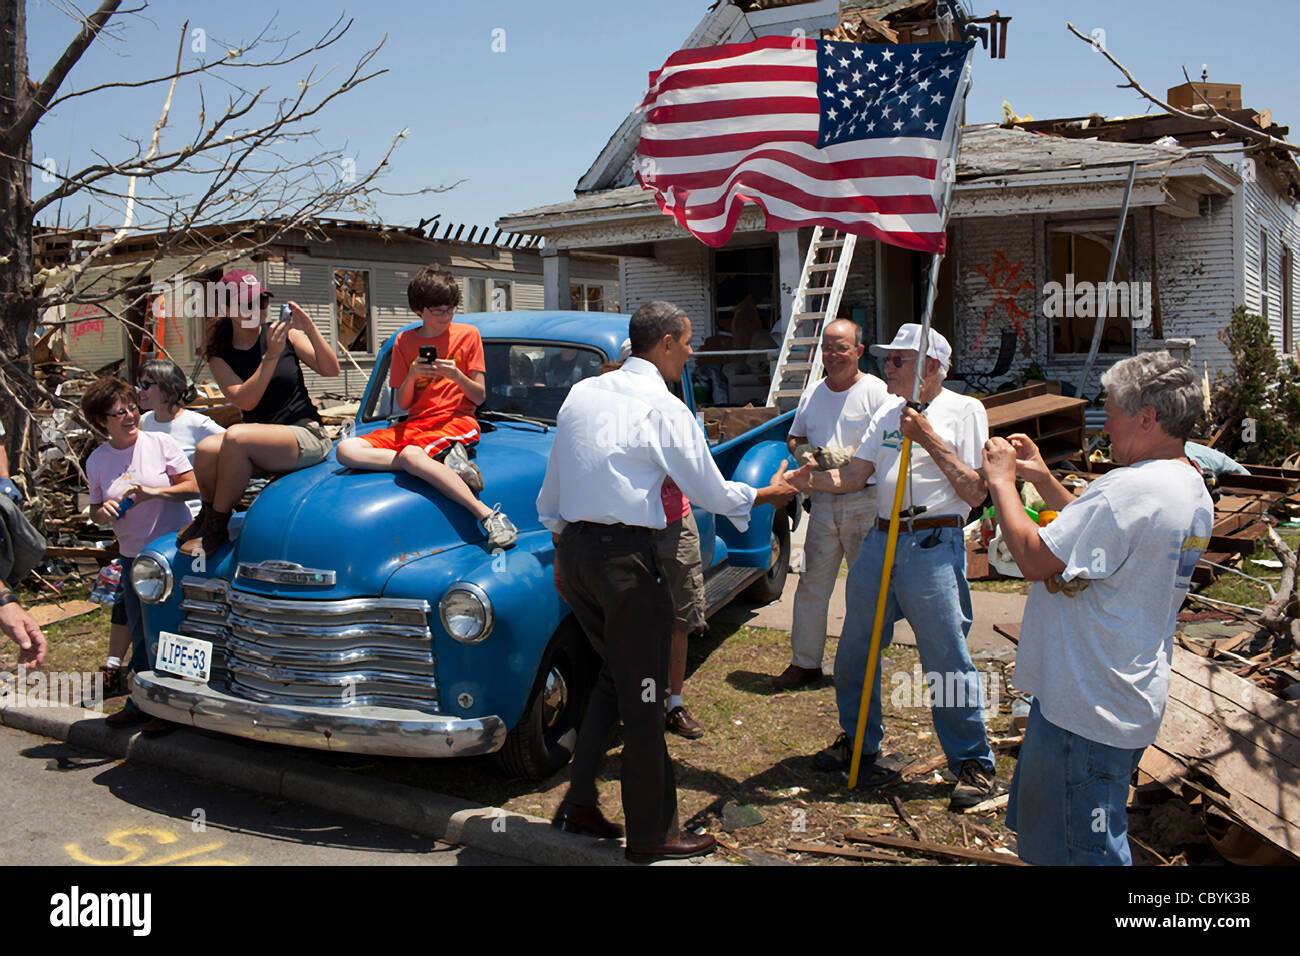 President Barack Obama shakes hands with Hugh Hills, 85, in front of his home destroyed by a tornado May 29, 2011 in Joplin, MO. Hills told the President he hid in a closet during the tornado, which destroyed the second floor and half the first floor of his house Stock Photo